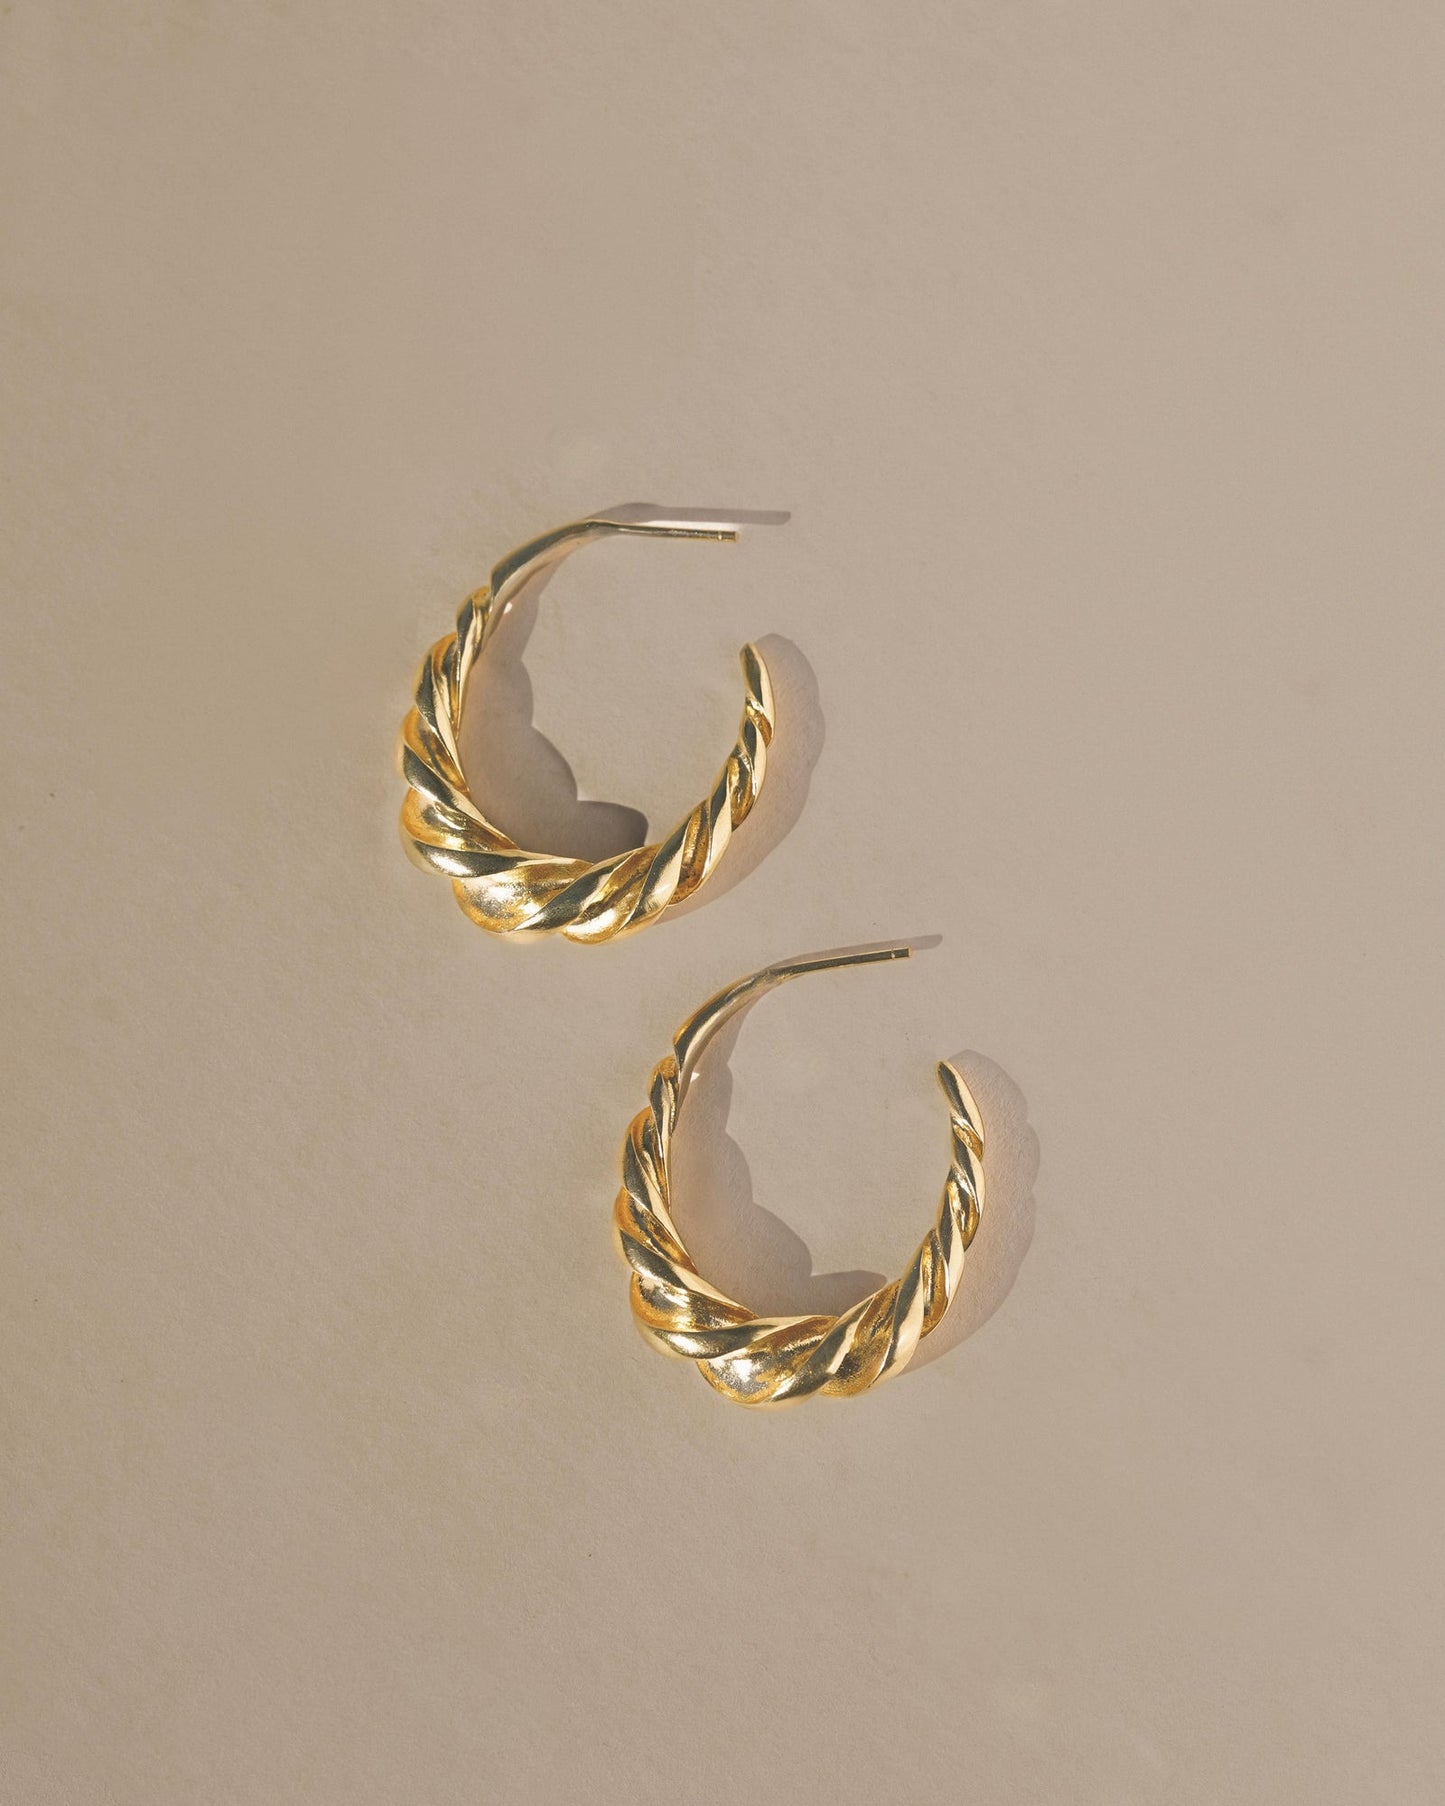 Textured twisted light weight gold vermeil hoop earrings. This pair can be worn daily for a sculptural and elegant classic style, with a twist. Handmade in the Sant Cruz Mountains.